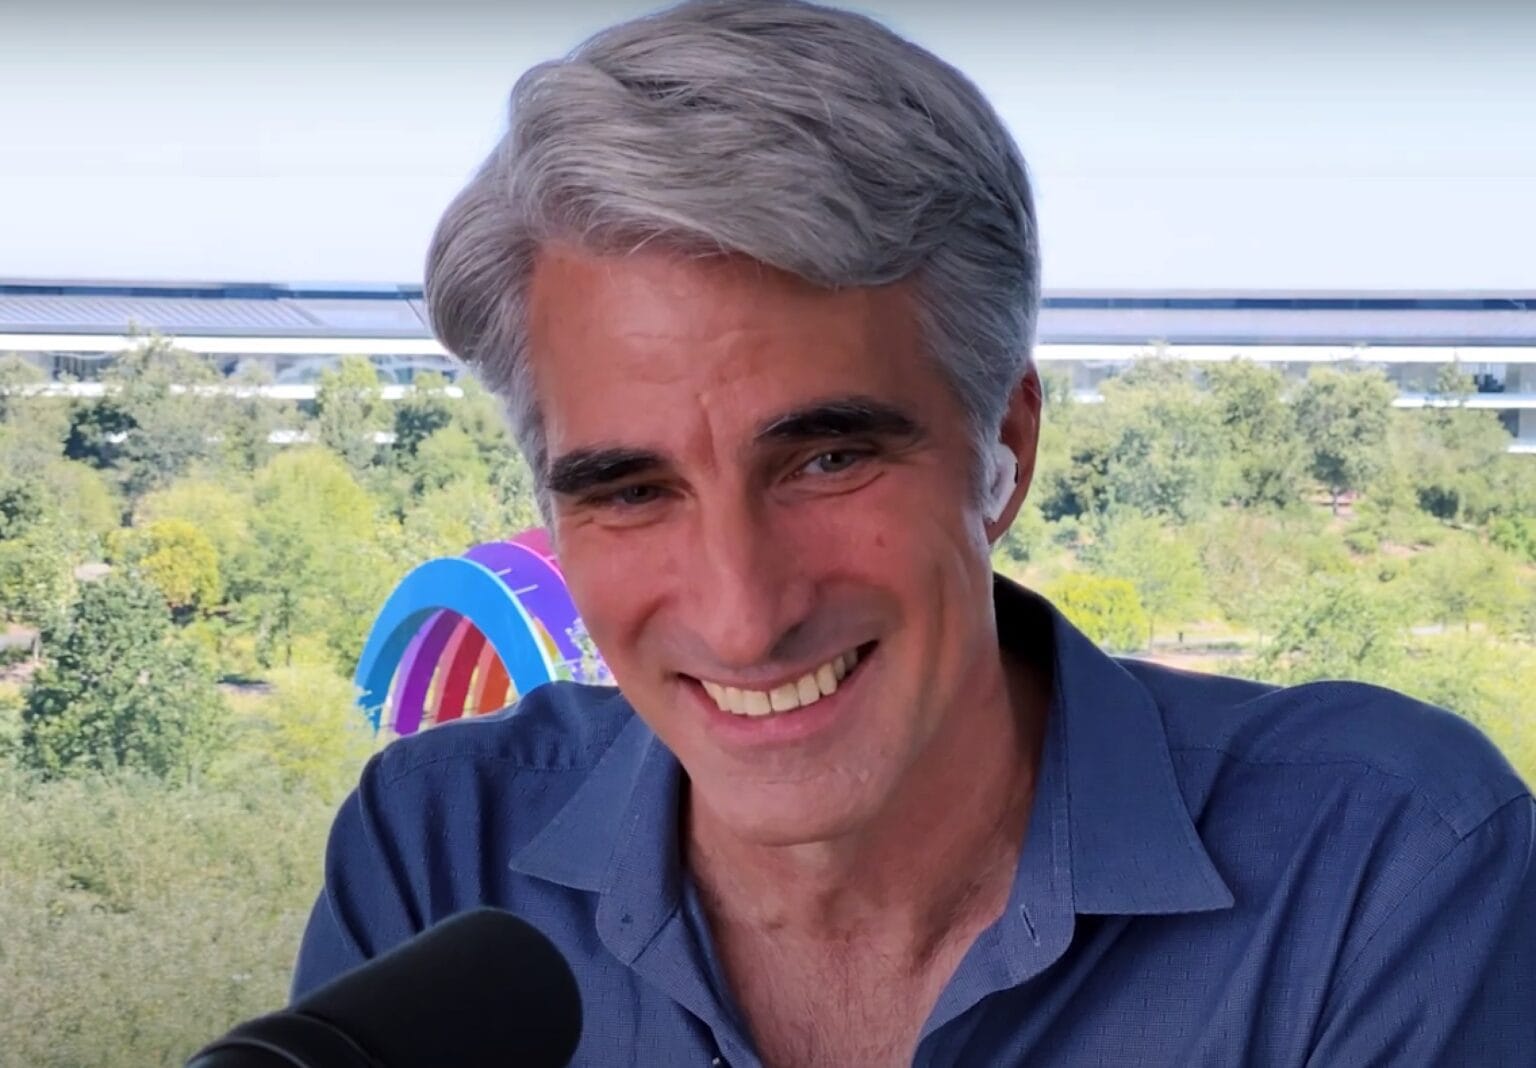 After Monday's successful WWDC keynote, Apple software chief Craig Federighi can breathe a sigh of relief.